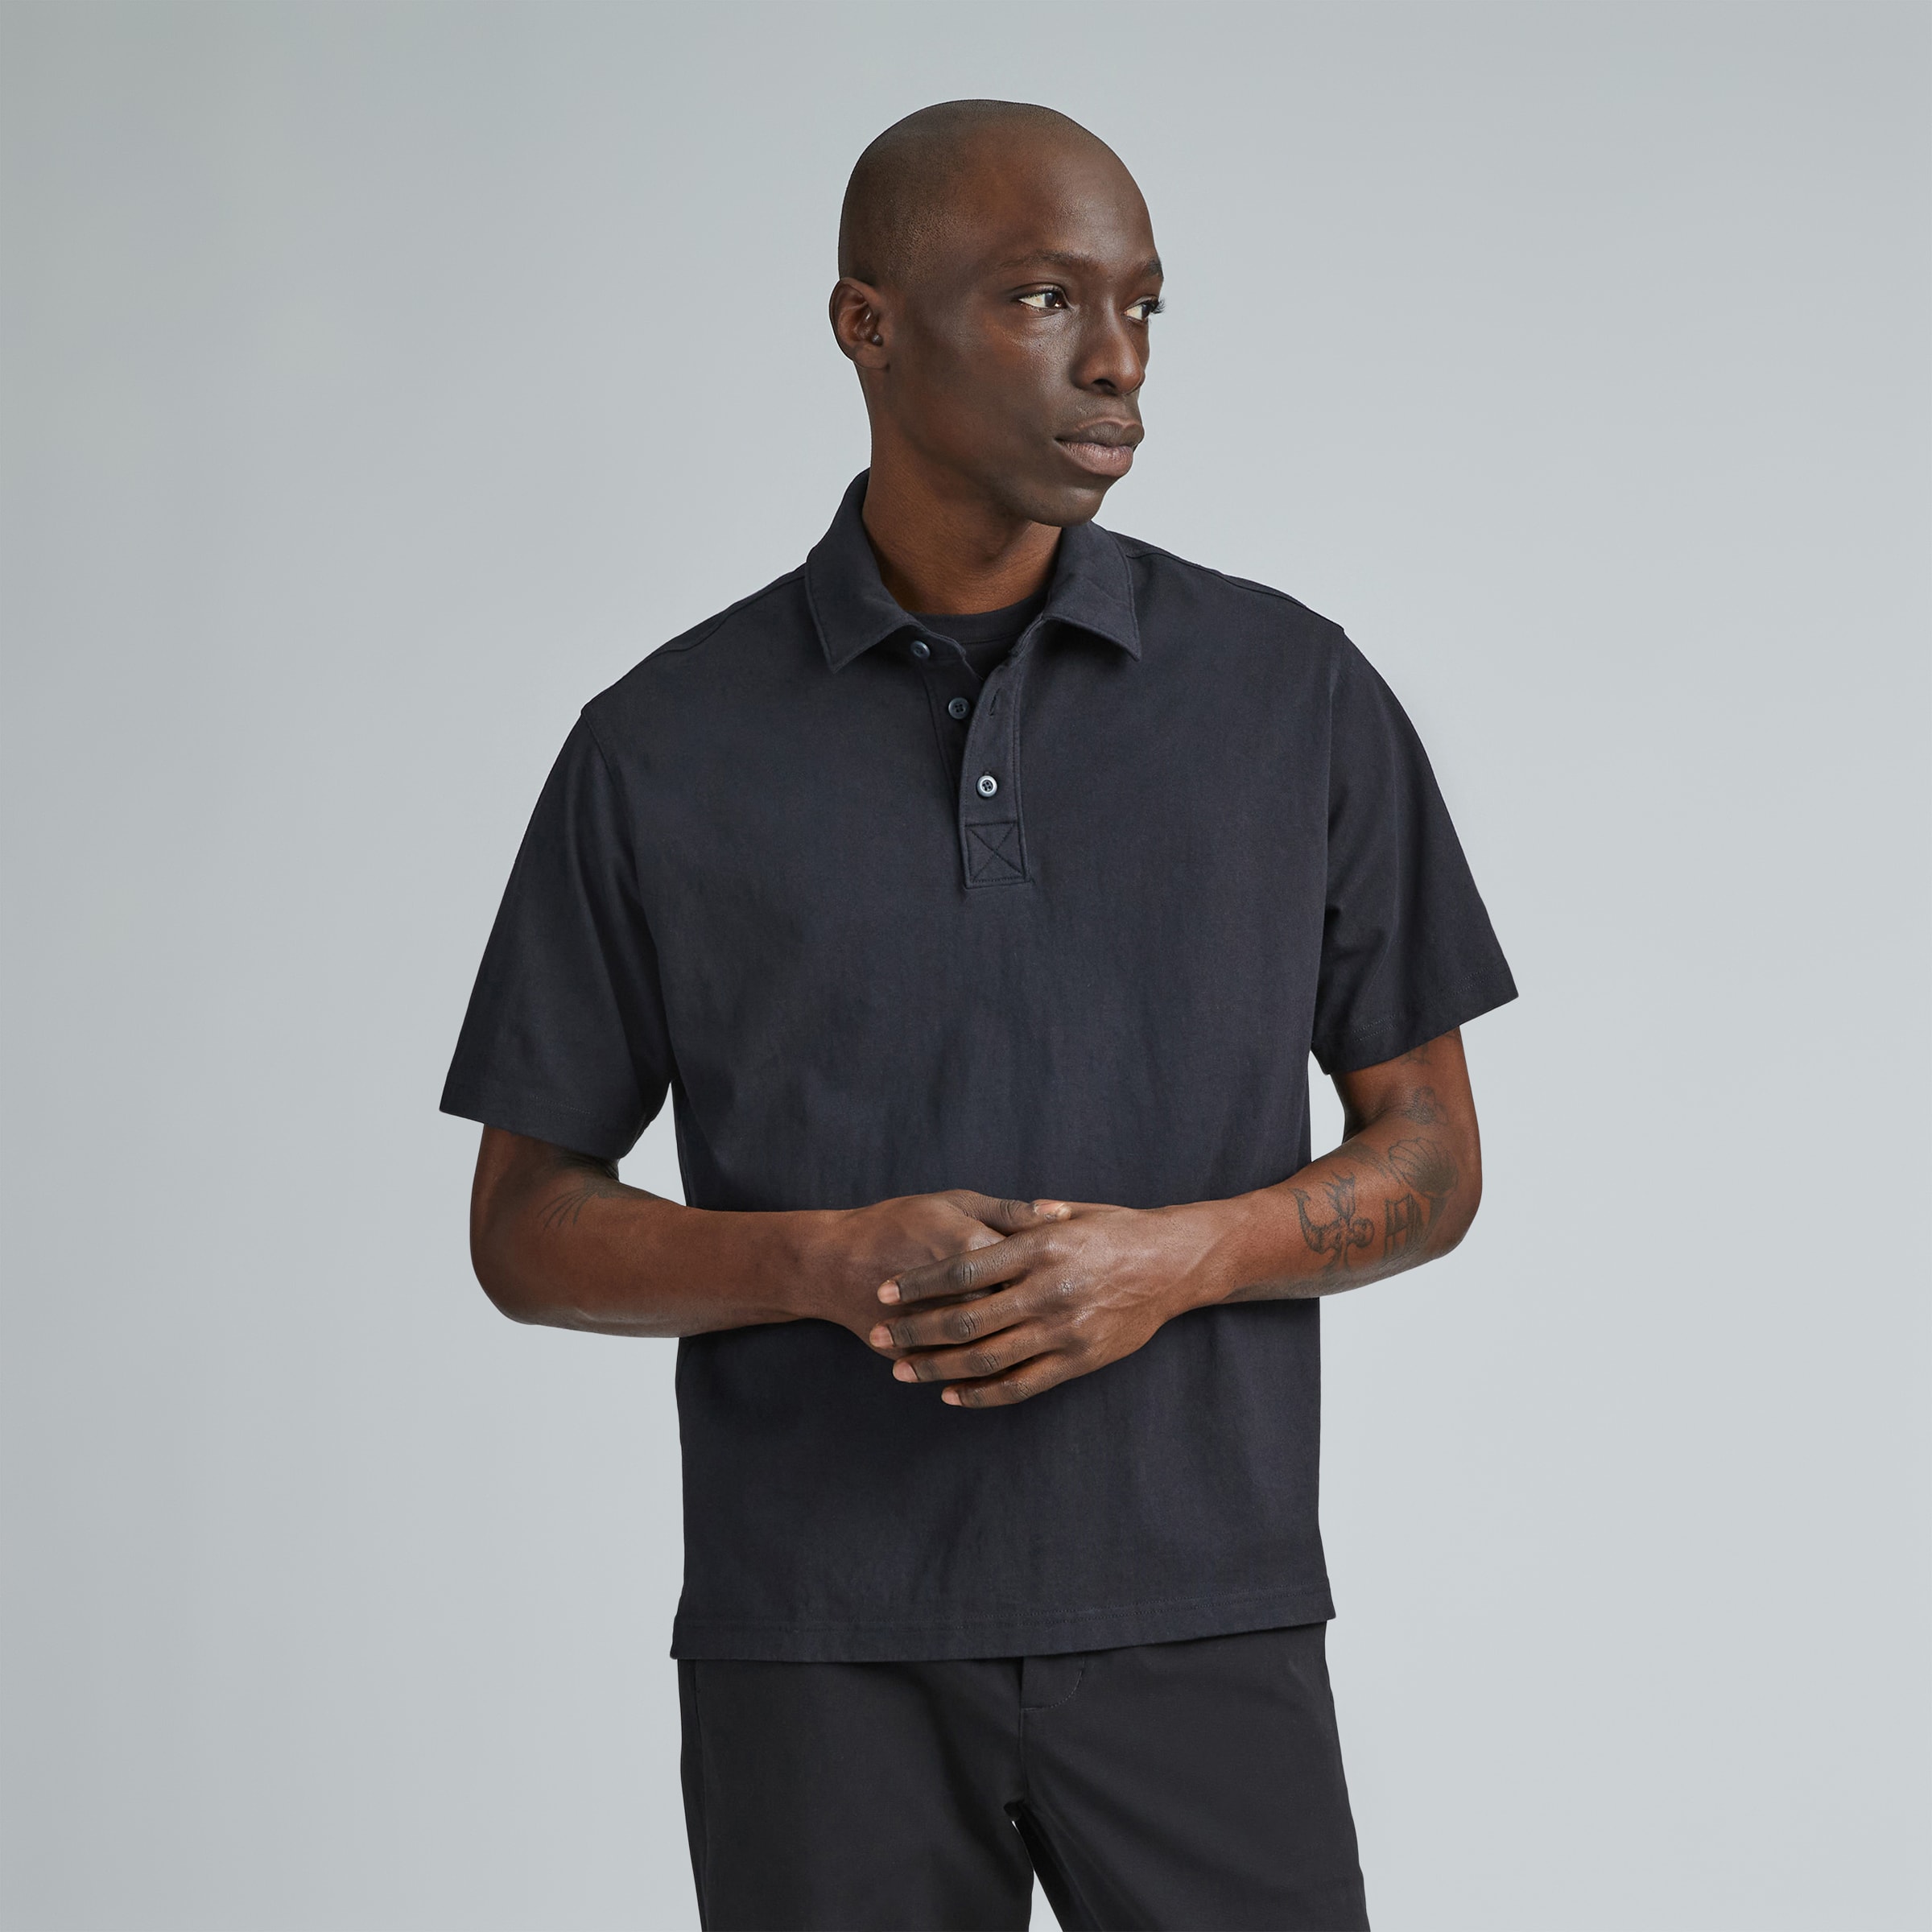 Everlane Men's Performance Polo T-Shirt in Black, Size Large